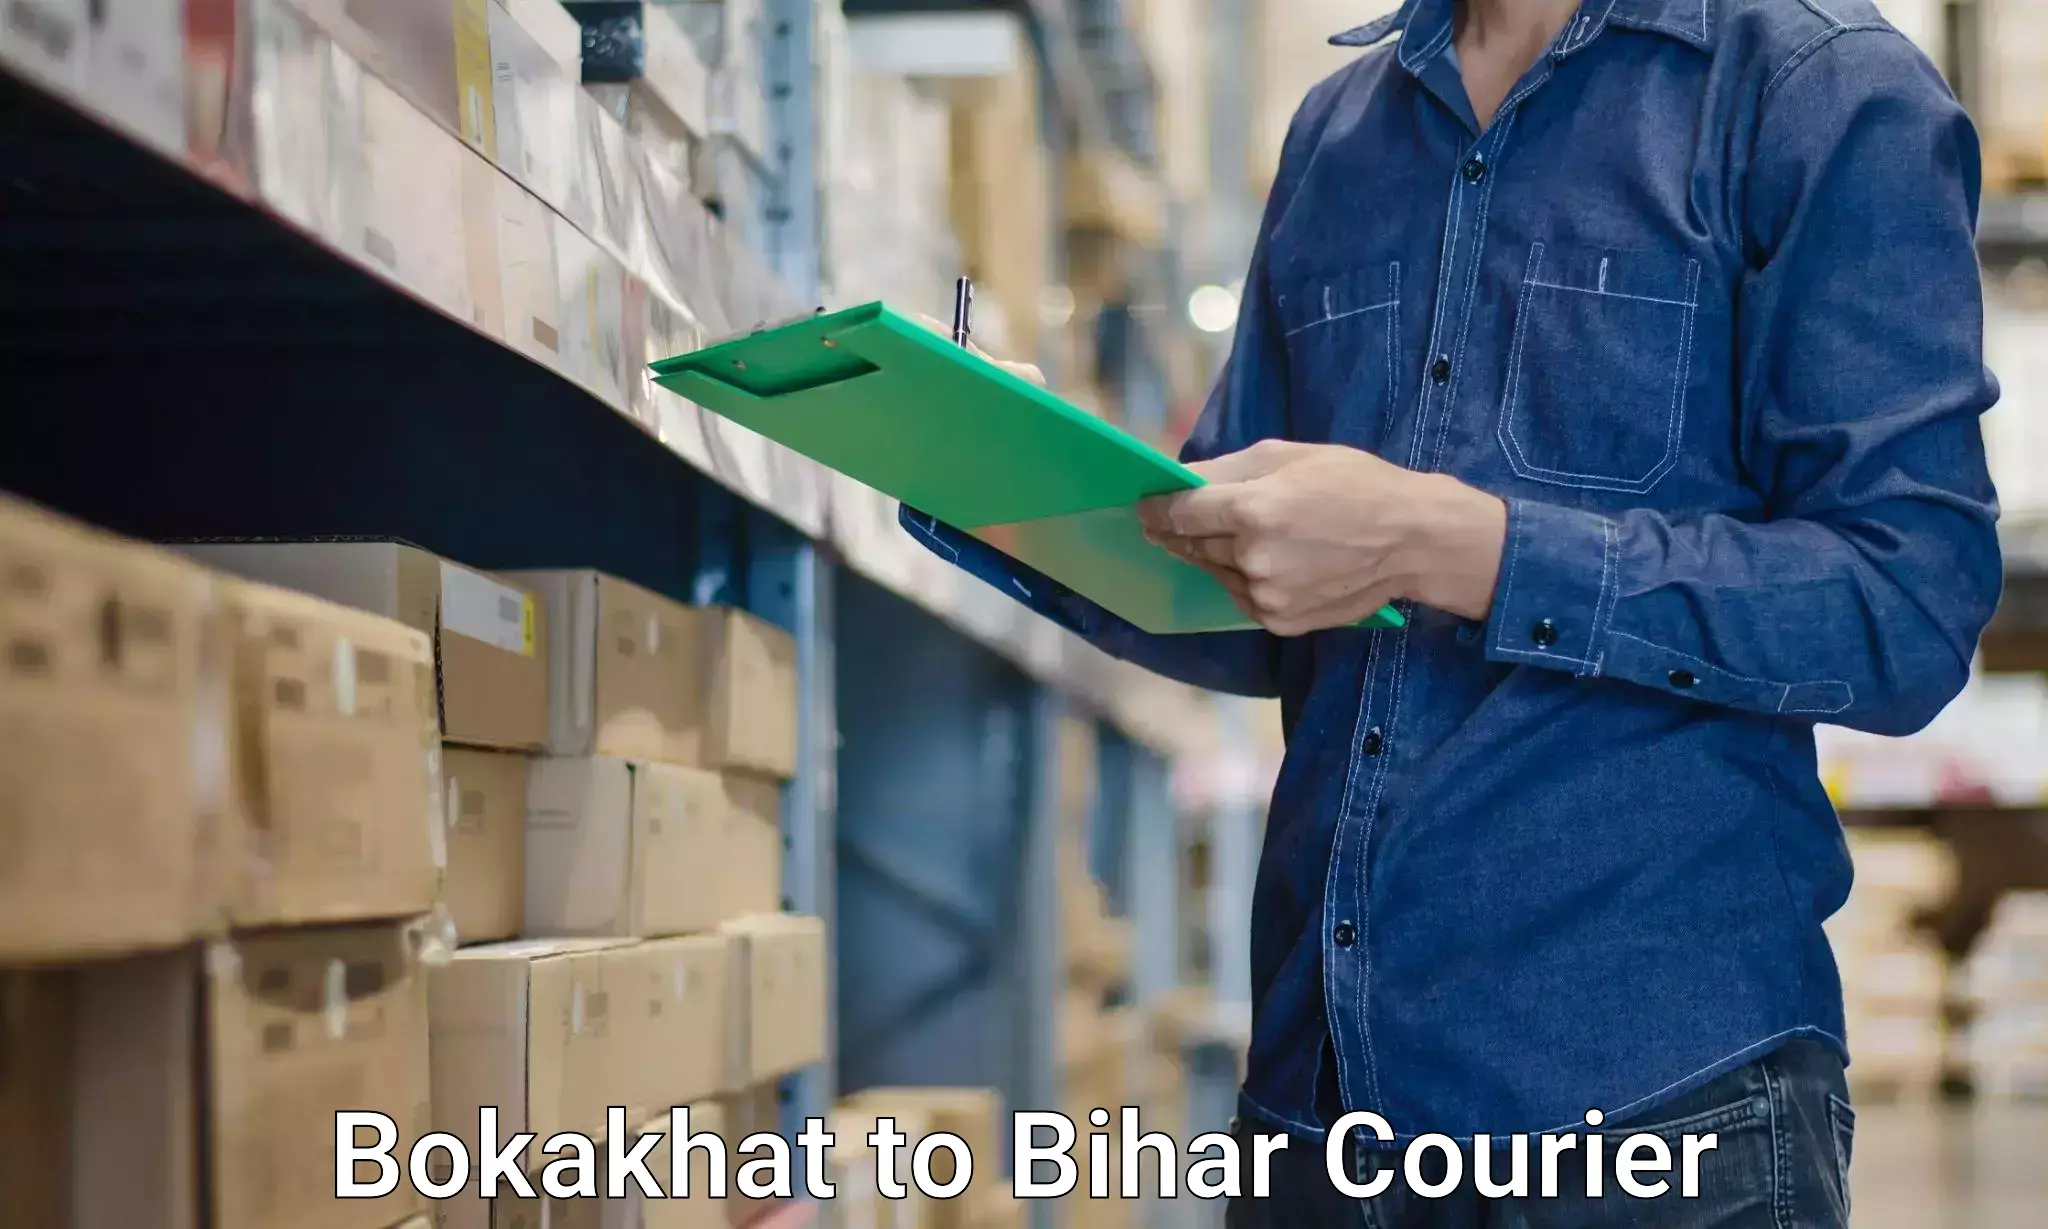 Quality relocation services in Bokakhat to Dumraon